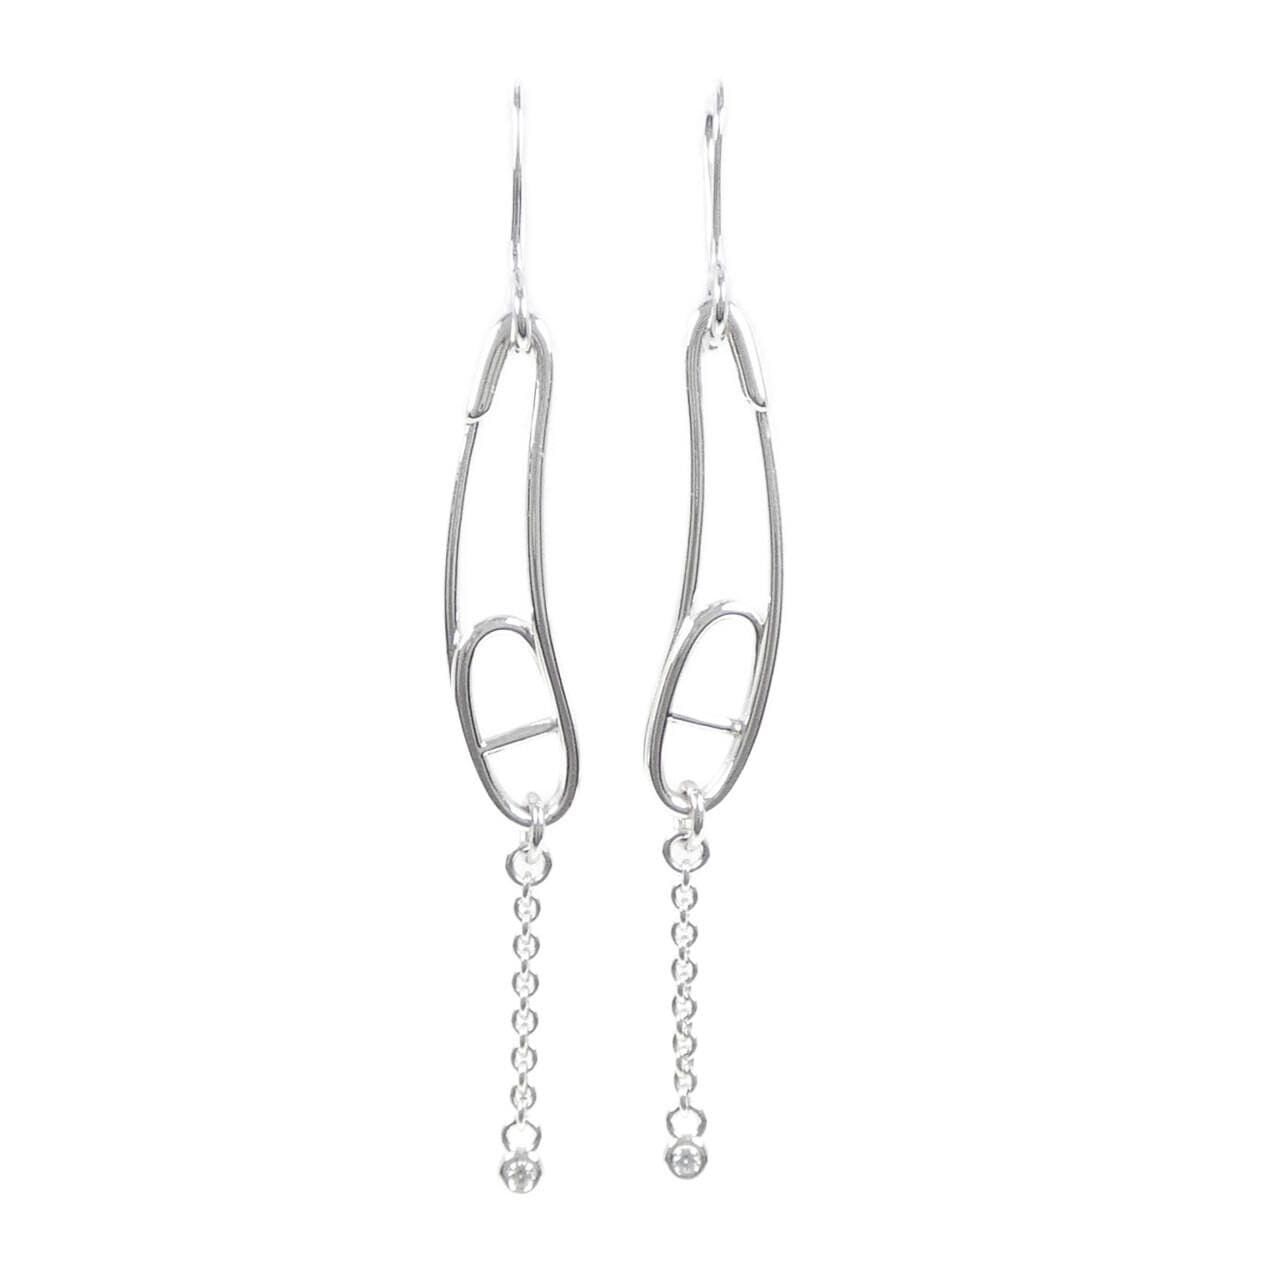 HERMES Chaine Dunkle Punk Small Earrings